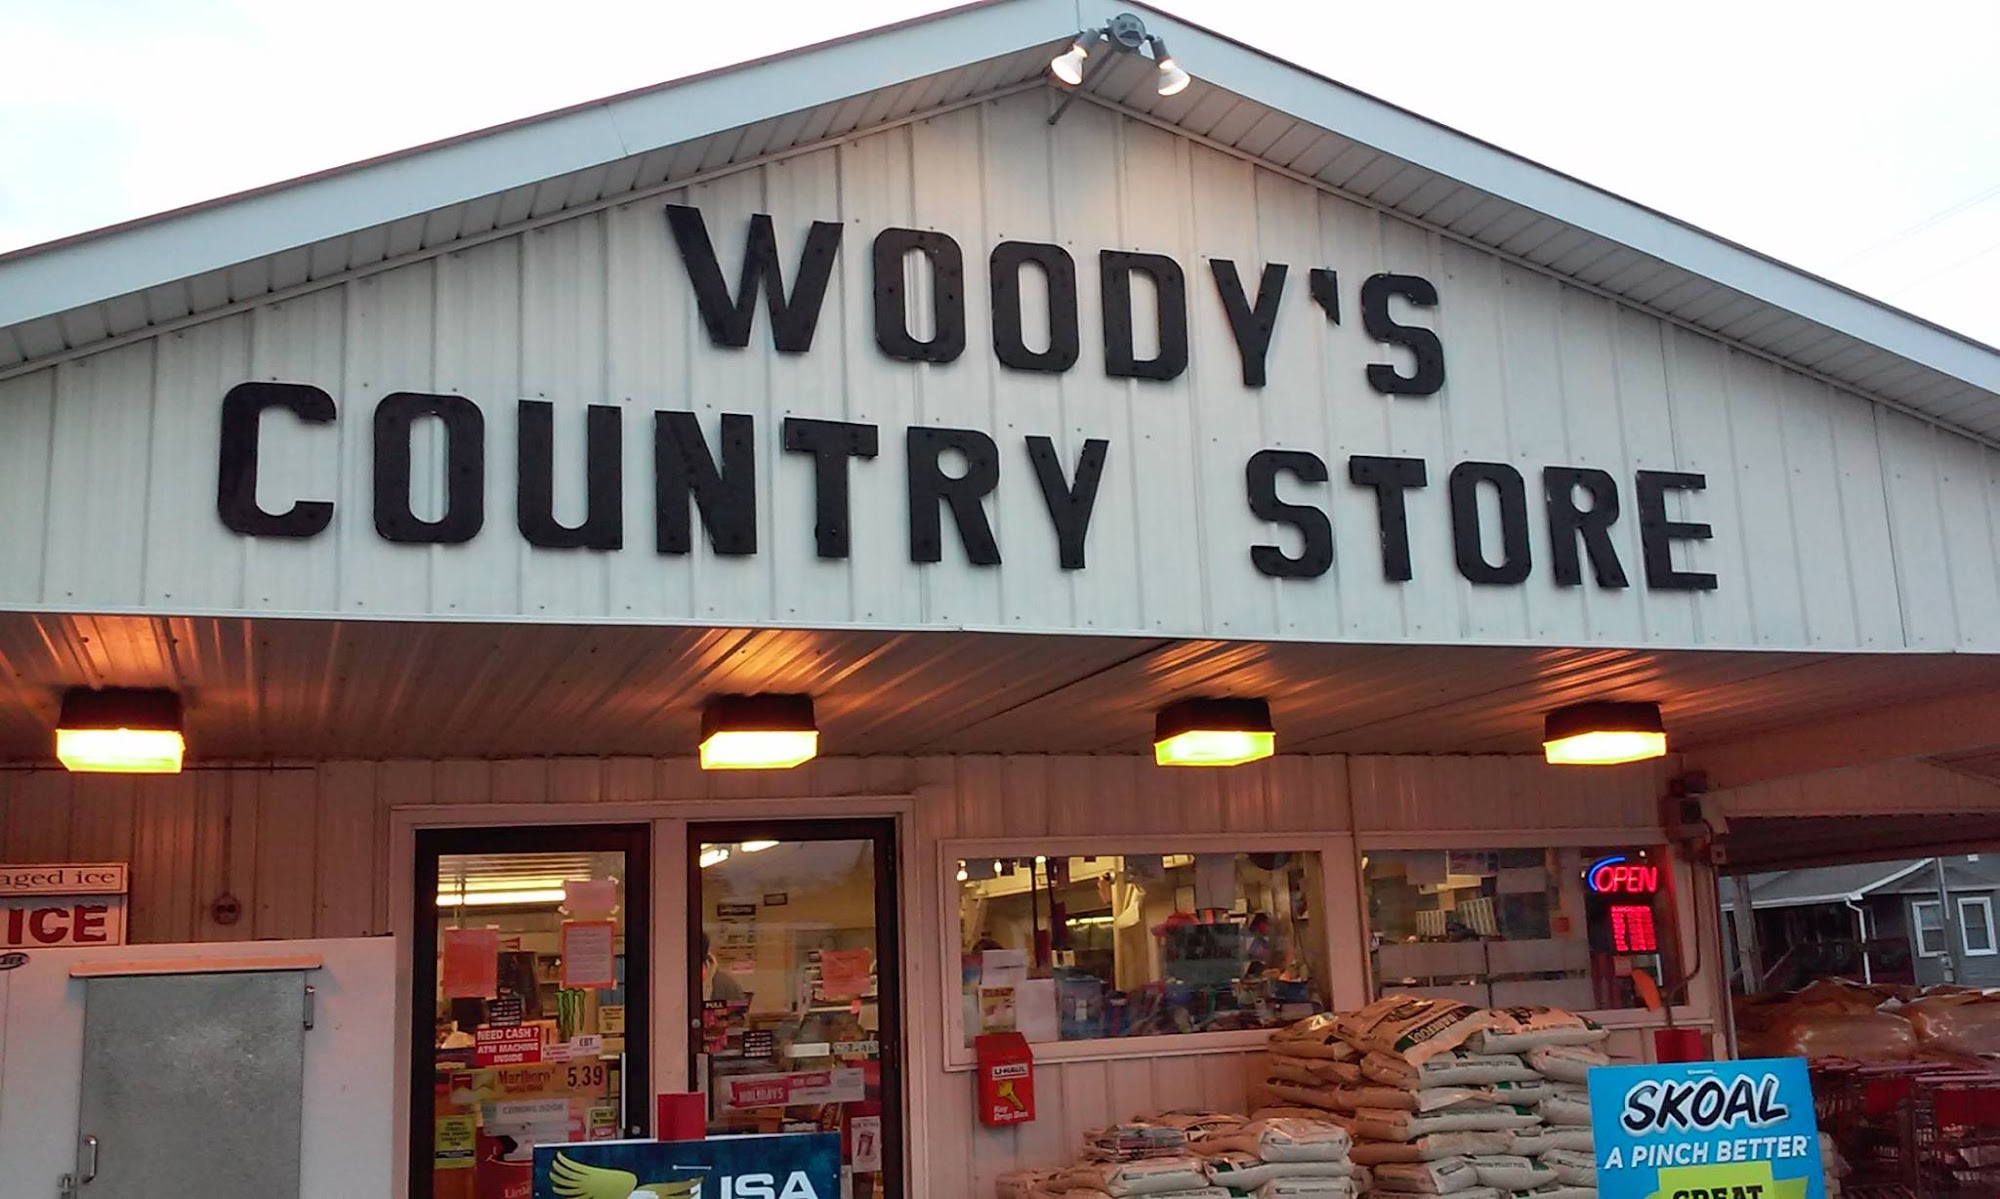 Woody's Country Store